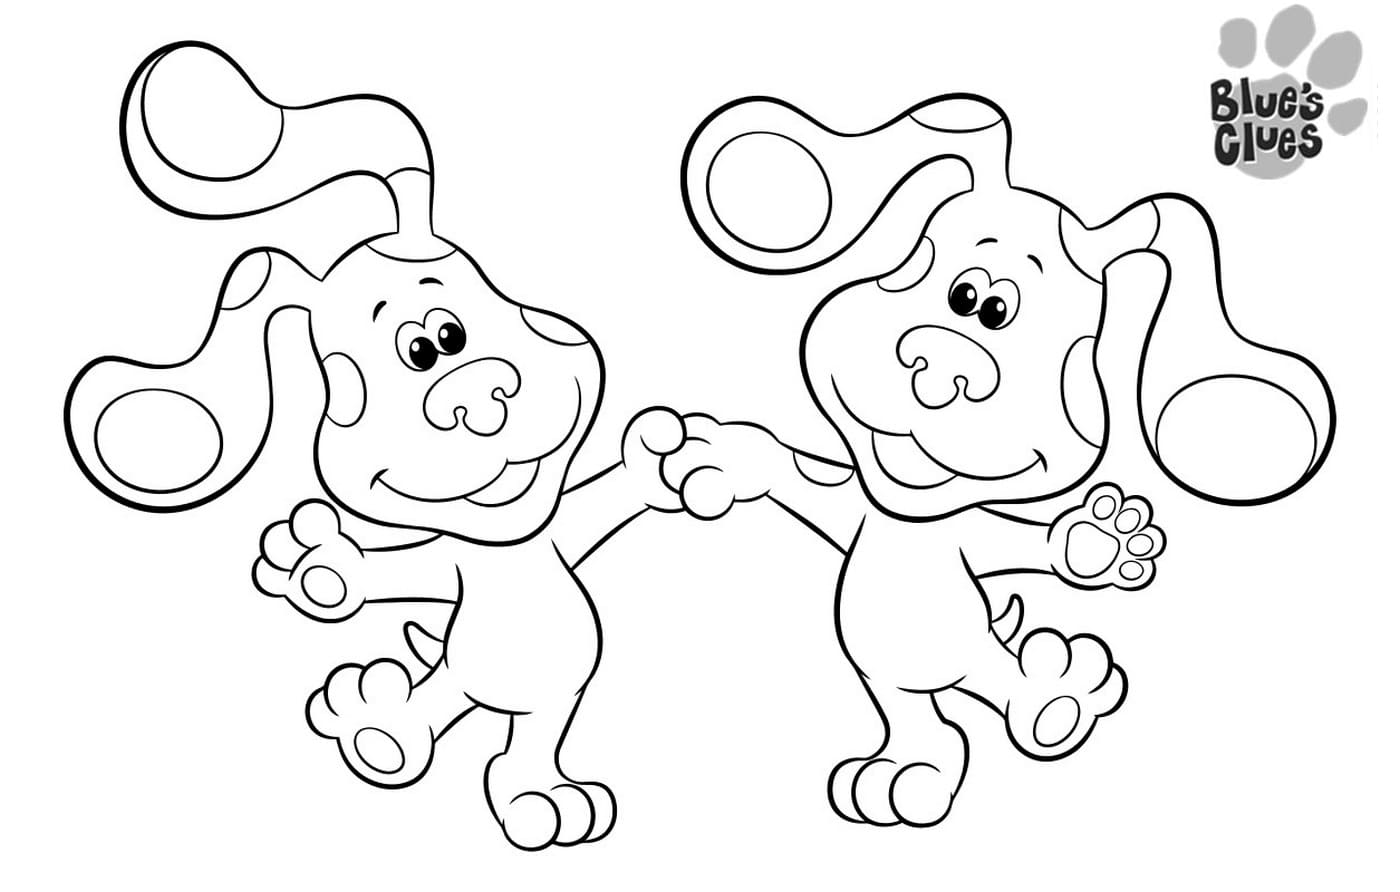 Free Printable Coloring Pages Of Blues Close